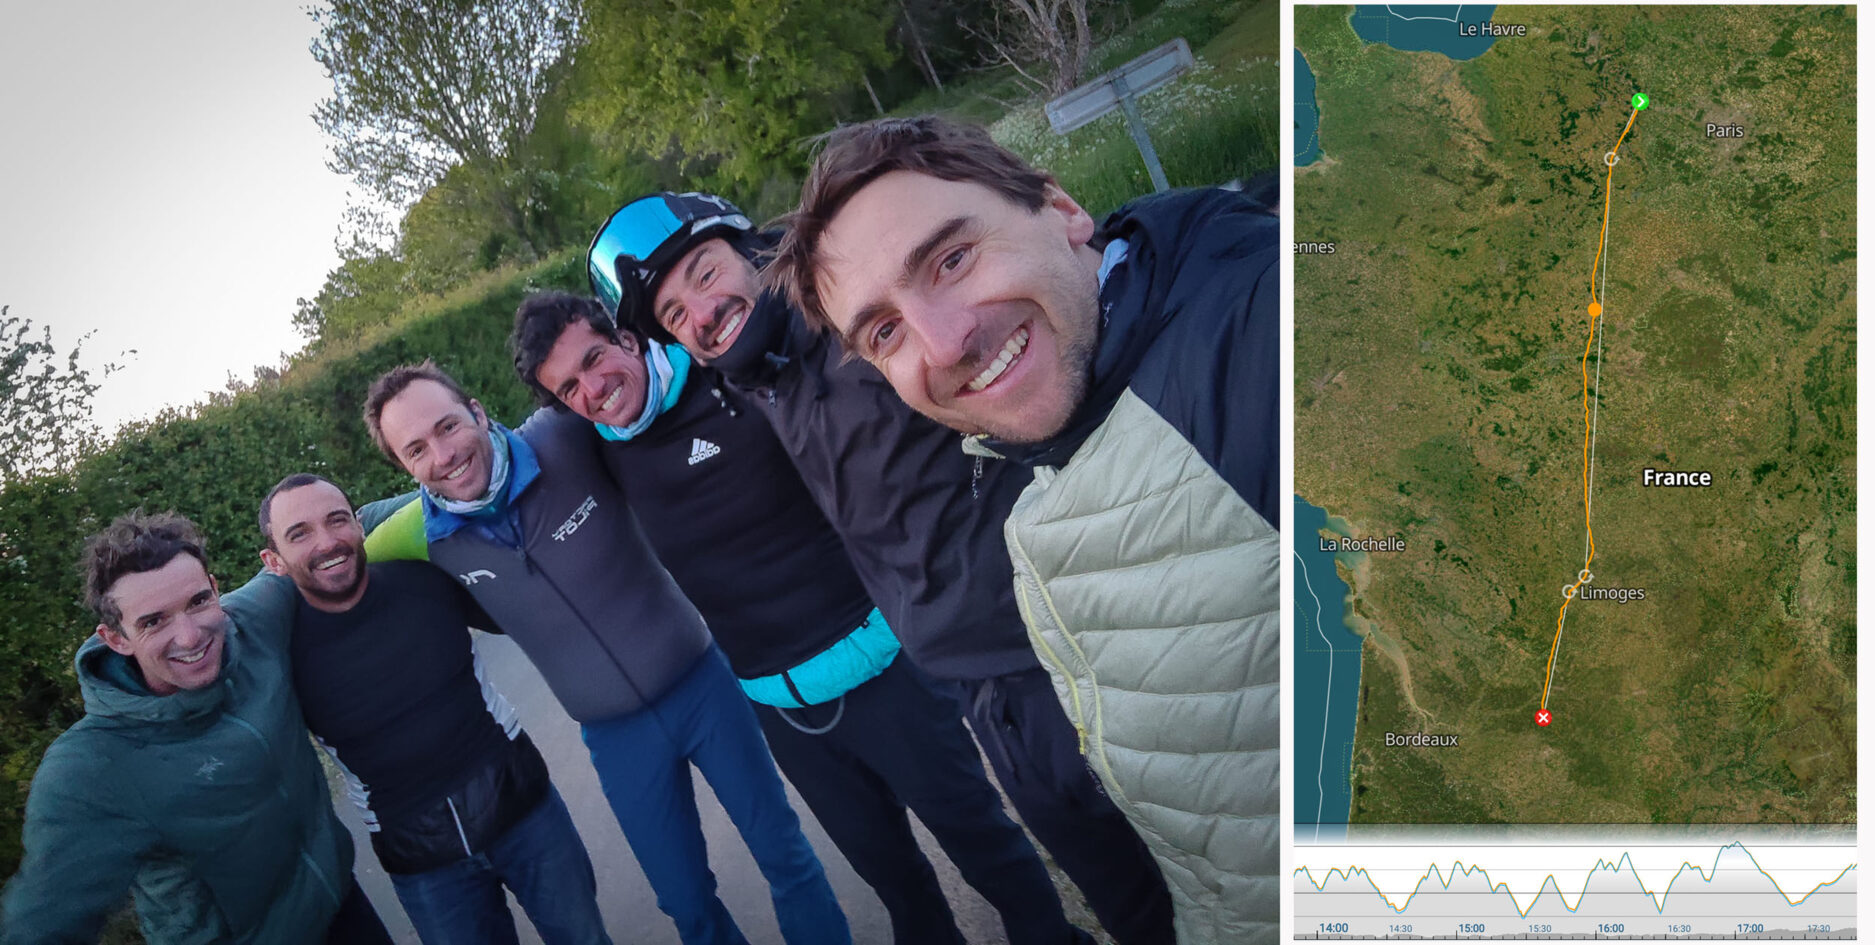 Honorin Hamard, Jonathan Marin, Maxime Pinot, Michel Cervellin, Tim Alongi and Julien Garcia all launched from a small site northwest of Paris and flew almost due south, landing close to the town of Bergerac.